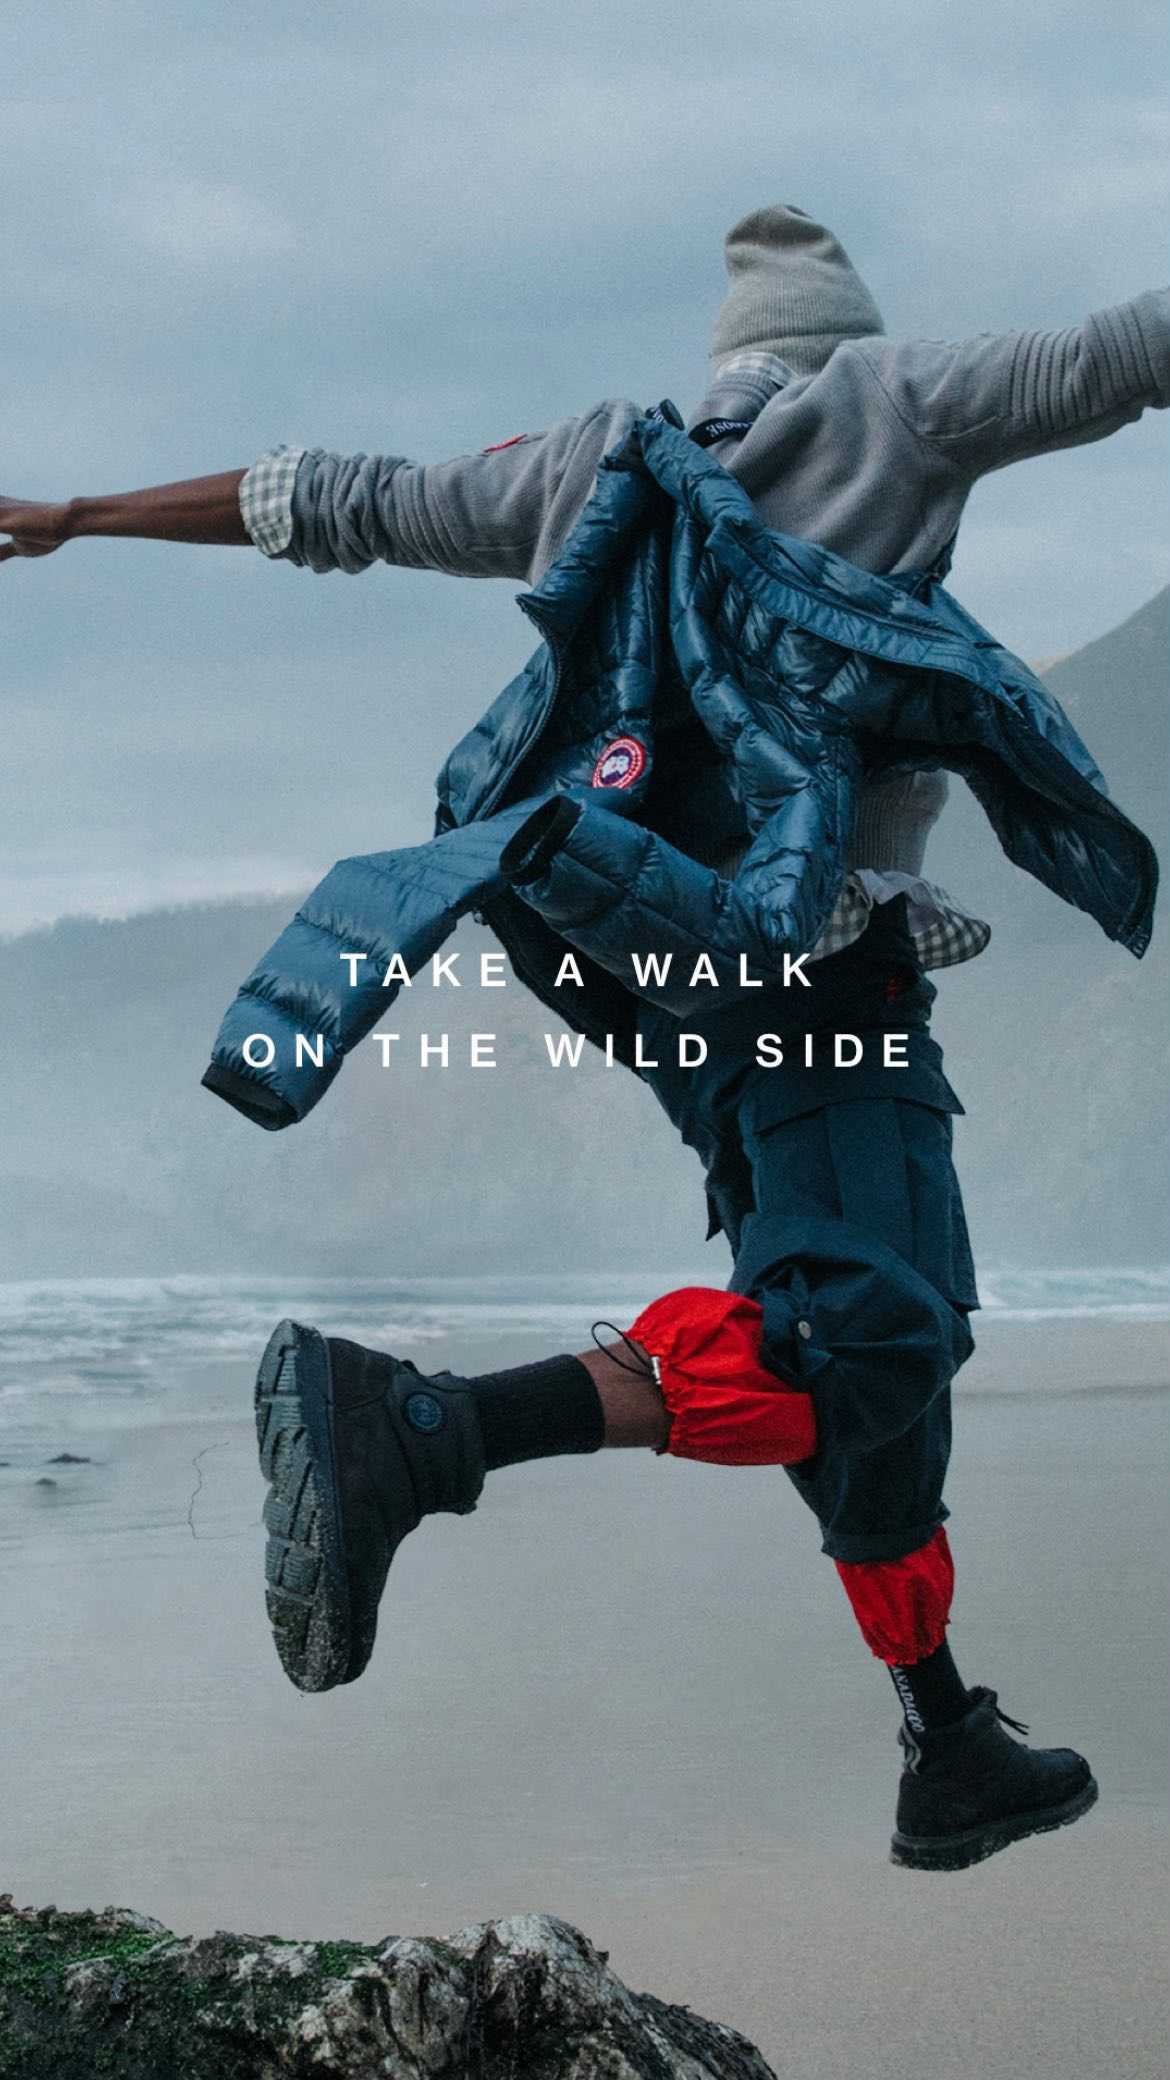 Full Spot!! Excited to share the @canadagoose 2022 campaign we worked on a couple of months ago in Big Sur! Huge thanks to @wearenuevo for having us on ⚡️
.
.
Director / Photographer @colesprouse 
Client @canadagoose
Creative Director: @pianummi 
Art Director: @rachelsimona13 
Production / Agency: @wearenuevo
US production: @tigerhousefilms
DP: @shanesigler 
Styling: @natasharoyt
Makeup: @michaelgoyette
Hair: @1.800.chanel
1st assistant: @ericmichaelroy
Talent: @lillijohnsonnn @malymannn @kealanaihe @tyler.dreed
1st AD: Billy Sullivan
Creative coordinator / props styling: @lucabuzas
THF Producer / Coordinator: @cedricchabloz @camhprice
Drone operator: @michaeljfilms 
Locations: Jere Newton
Production Support: @oma.oakland @nico__chavez 
THF PA’s: @followfala @dirtydurt 
AC: @dave_eaves 
.
.
#canadagoose #canadagoose2022 #campaign #shooting #advertising #campaignshoot #bigsur #location #shoot #campaignshoot #production #productionlife #ss22 #setlife #liveintheopen